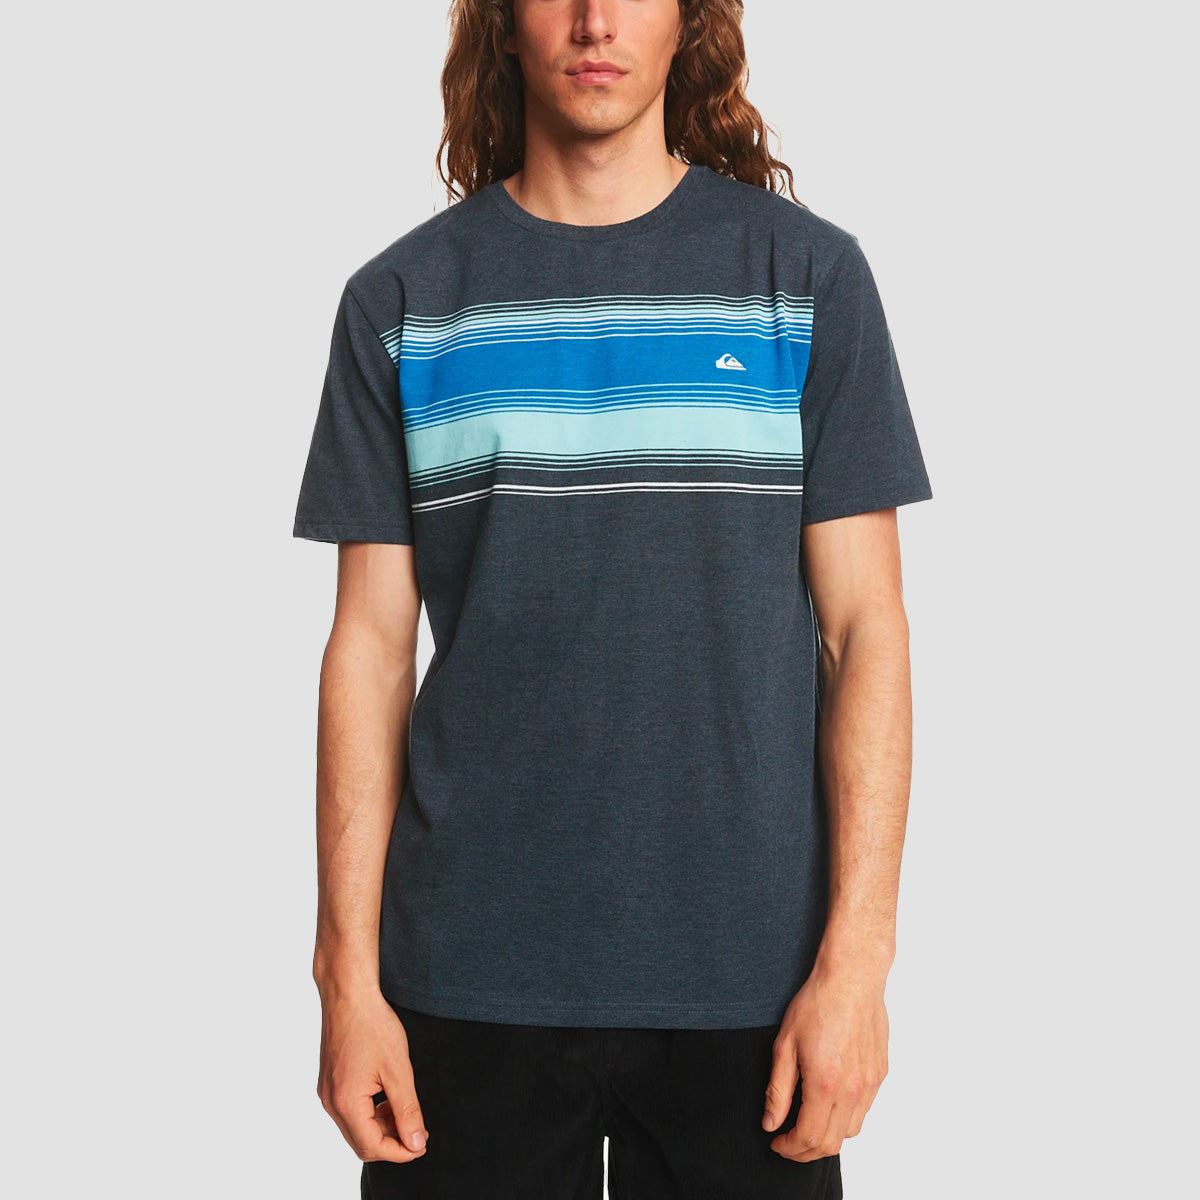 Quiksilver Men's T-Shirts | Rollersnakes